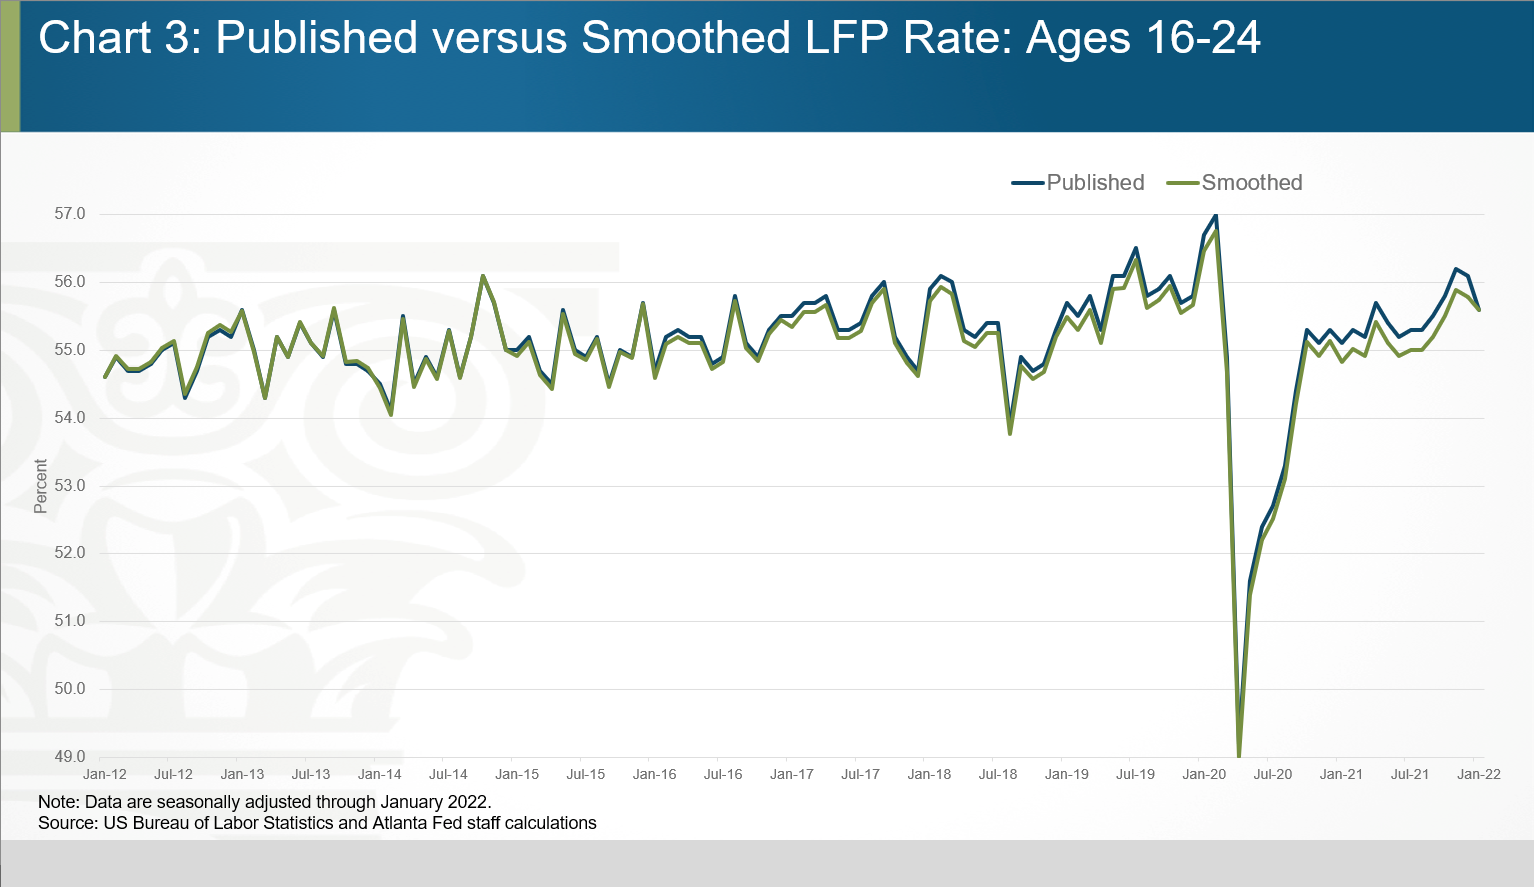 Chart 03 of 06: Published versus Smoothed LFP Rate: Ages 16-24